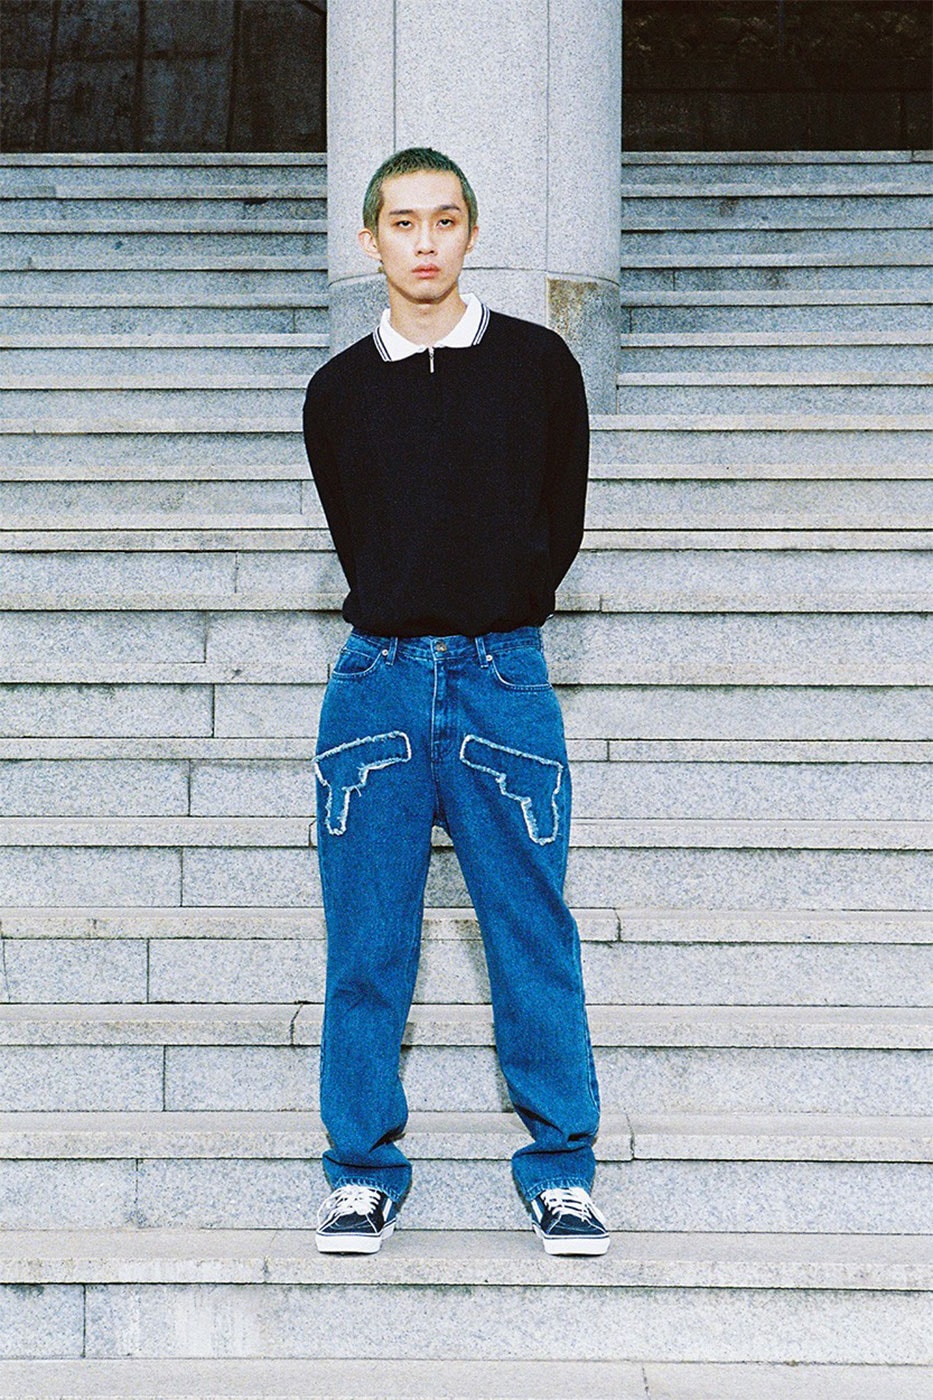 AJOBYAJO SS22 Collection Boys Can Cry Lookbook Release Info Buy Price South Korea T-shirts Shirts Check Stripes Denim Suits Backpack Headband Robot